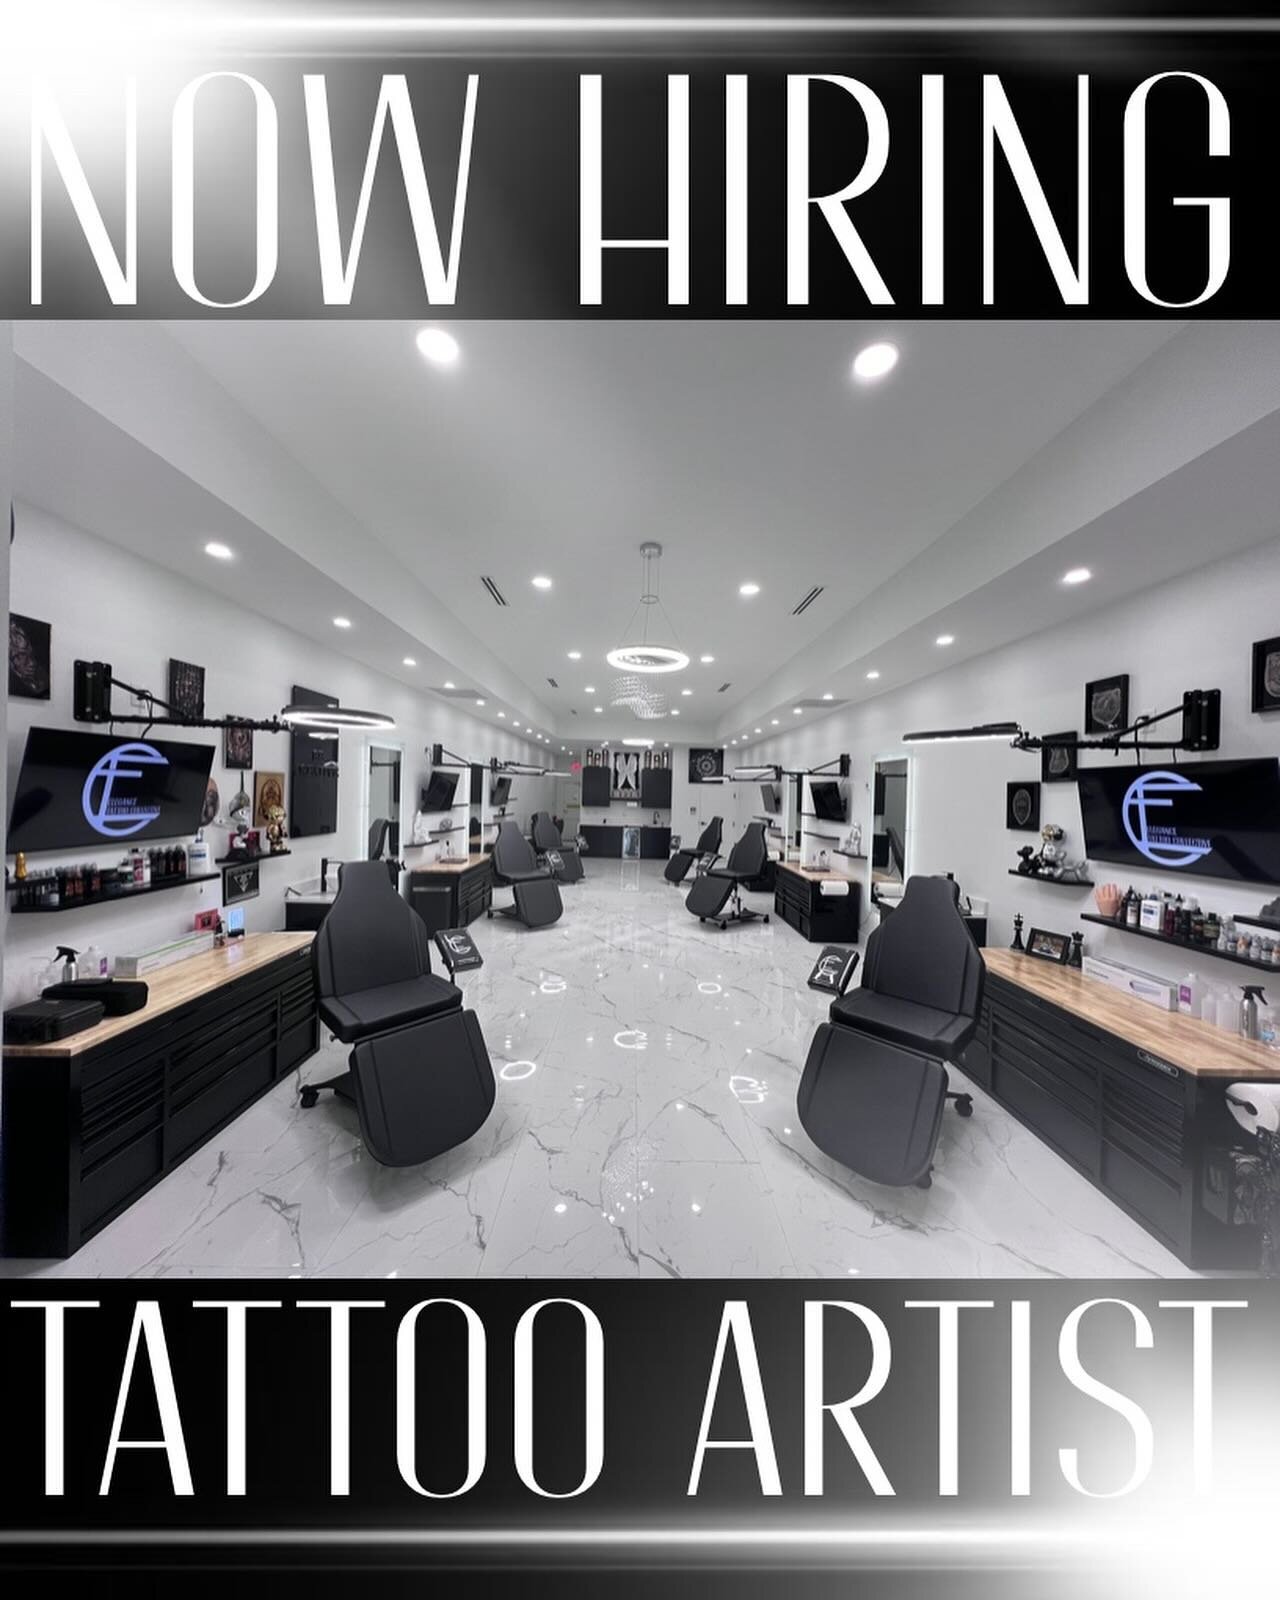 Exciting news! We&rsquo;re on the hunt for a talented tattoo artist to join our team! At @elegancetattoocollective Drug and drama free studio! If you&rsquo;re a skilled artist with minimum 2 years of experience and  passion for creating stunning, cus